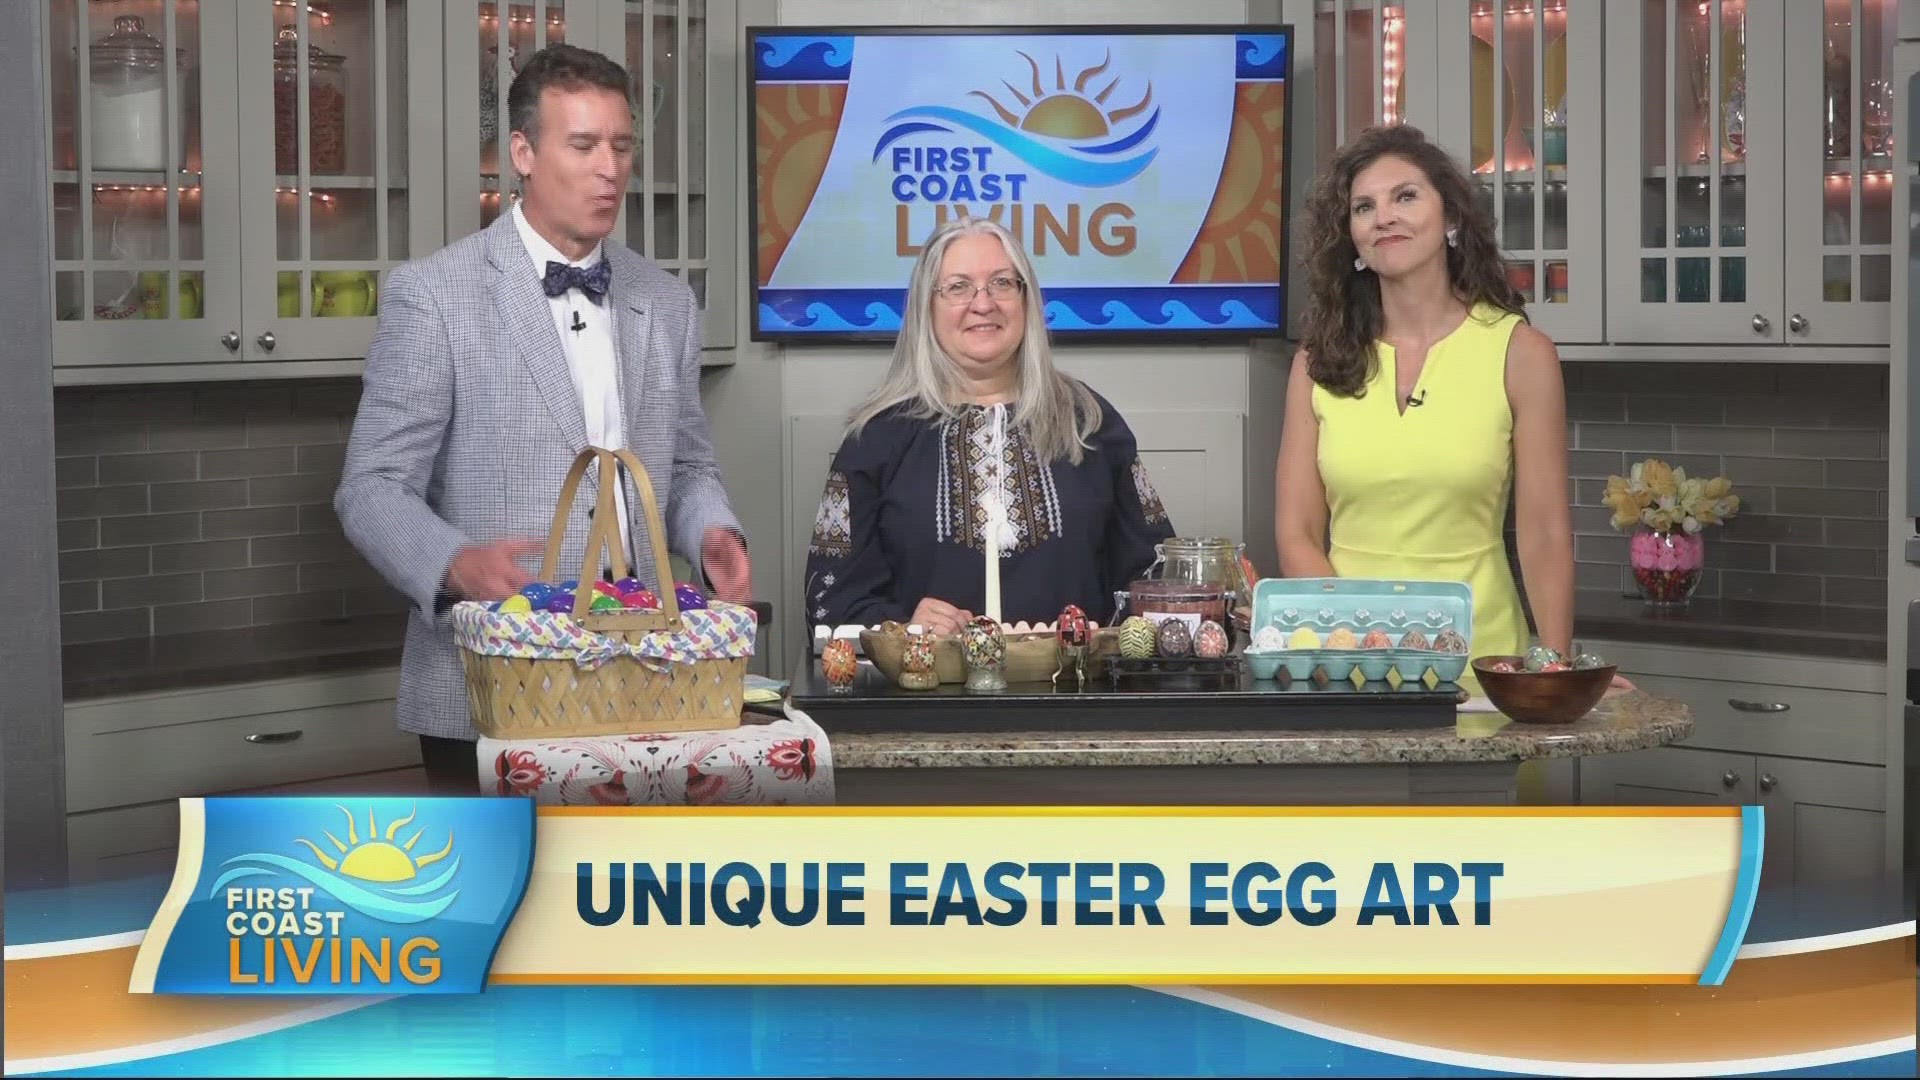 Mike and Jordan learn the Ukrainian tradition of decorating Easter eggs known as Pysanky.